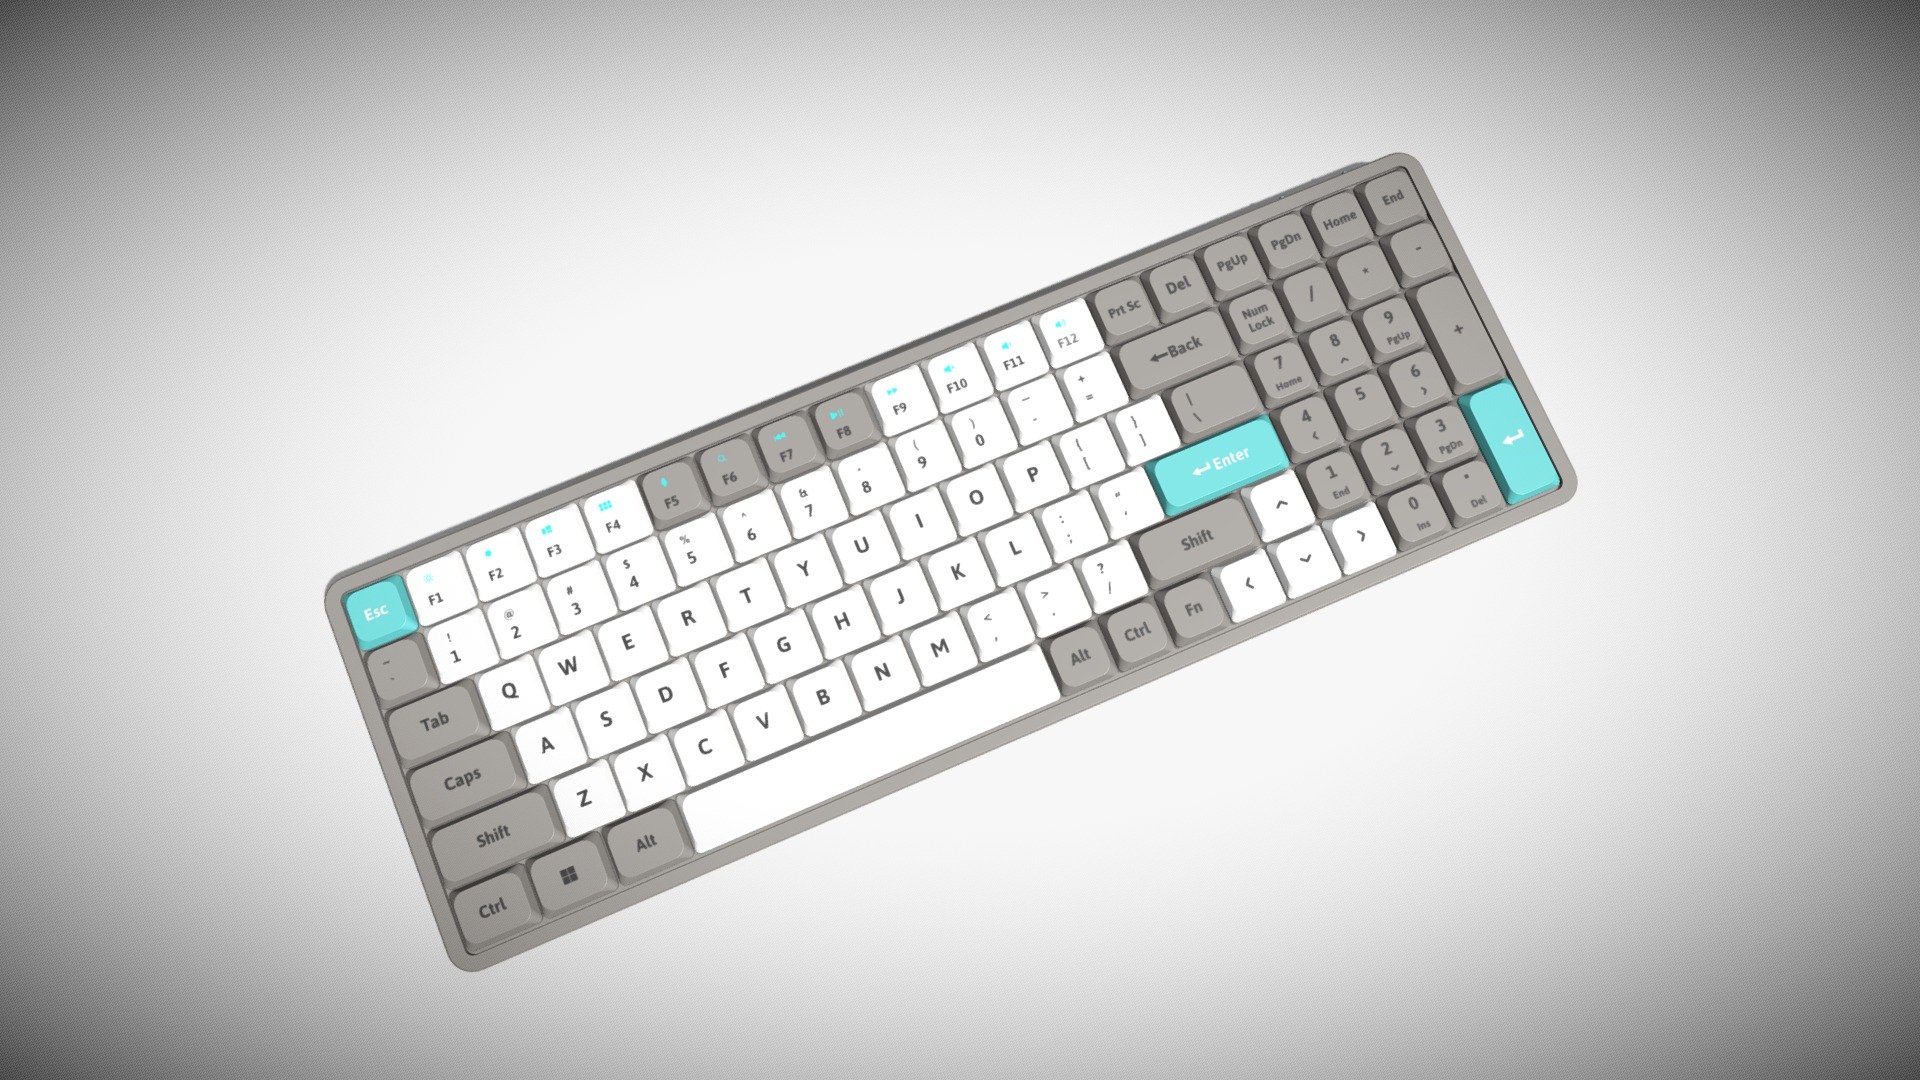 Detailed model of a grey 1800 Compact Keyboard, modeled in Cinema 4D.The model was created using approximate real world dimensions.

The model has 56,449 polys and 56,646 vertices.

An additional file has been provided containing the original Cinema 4D project files with both standard and v-ray materials, textures and other 3d export files such as 3ds, fbx and obj 3d model